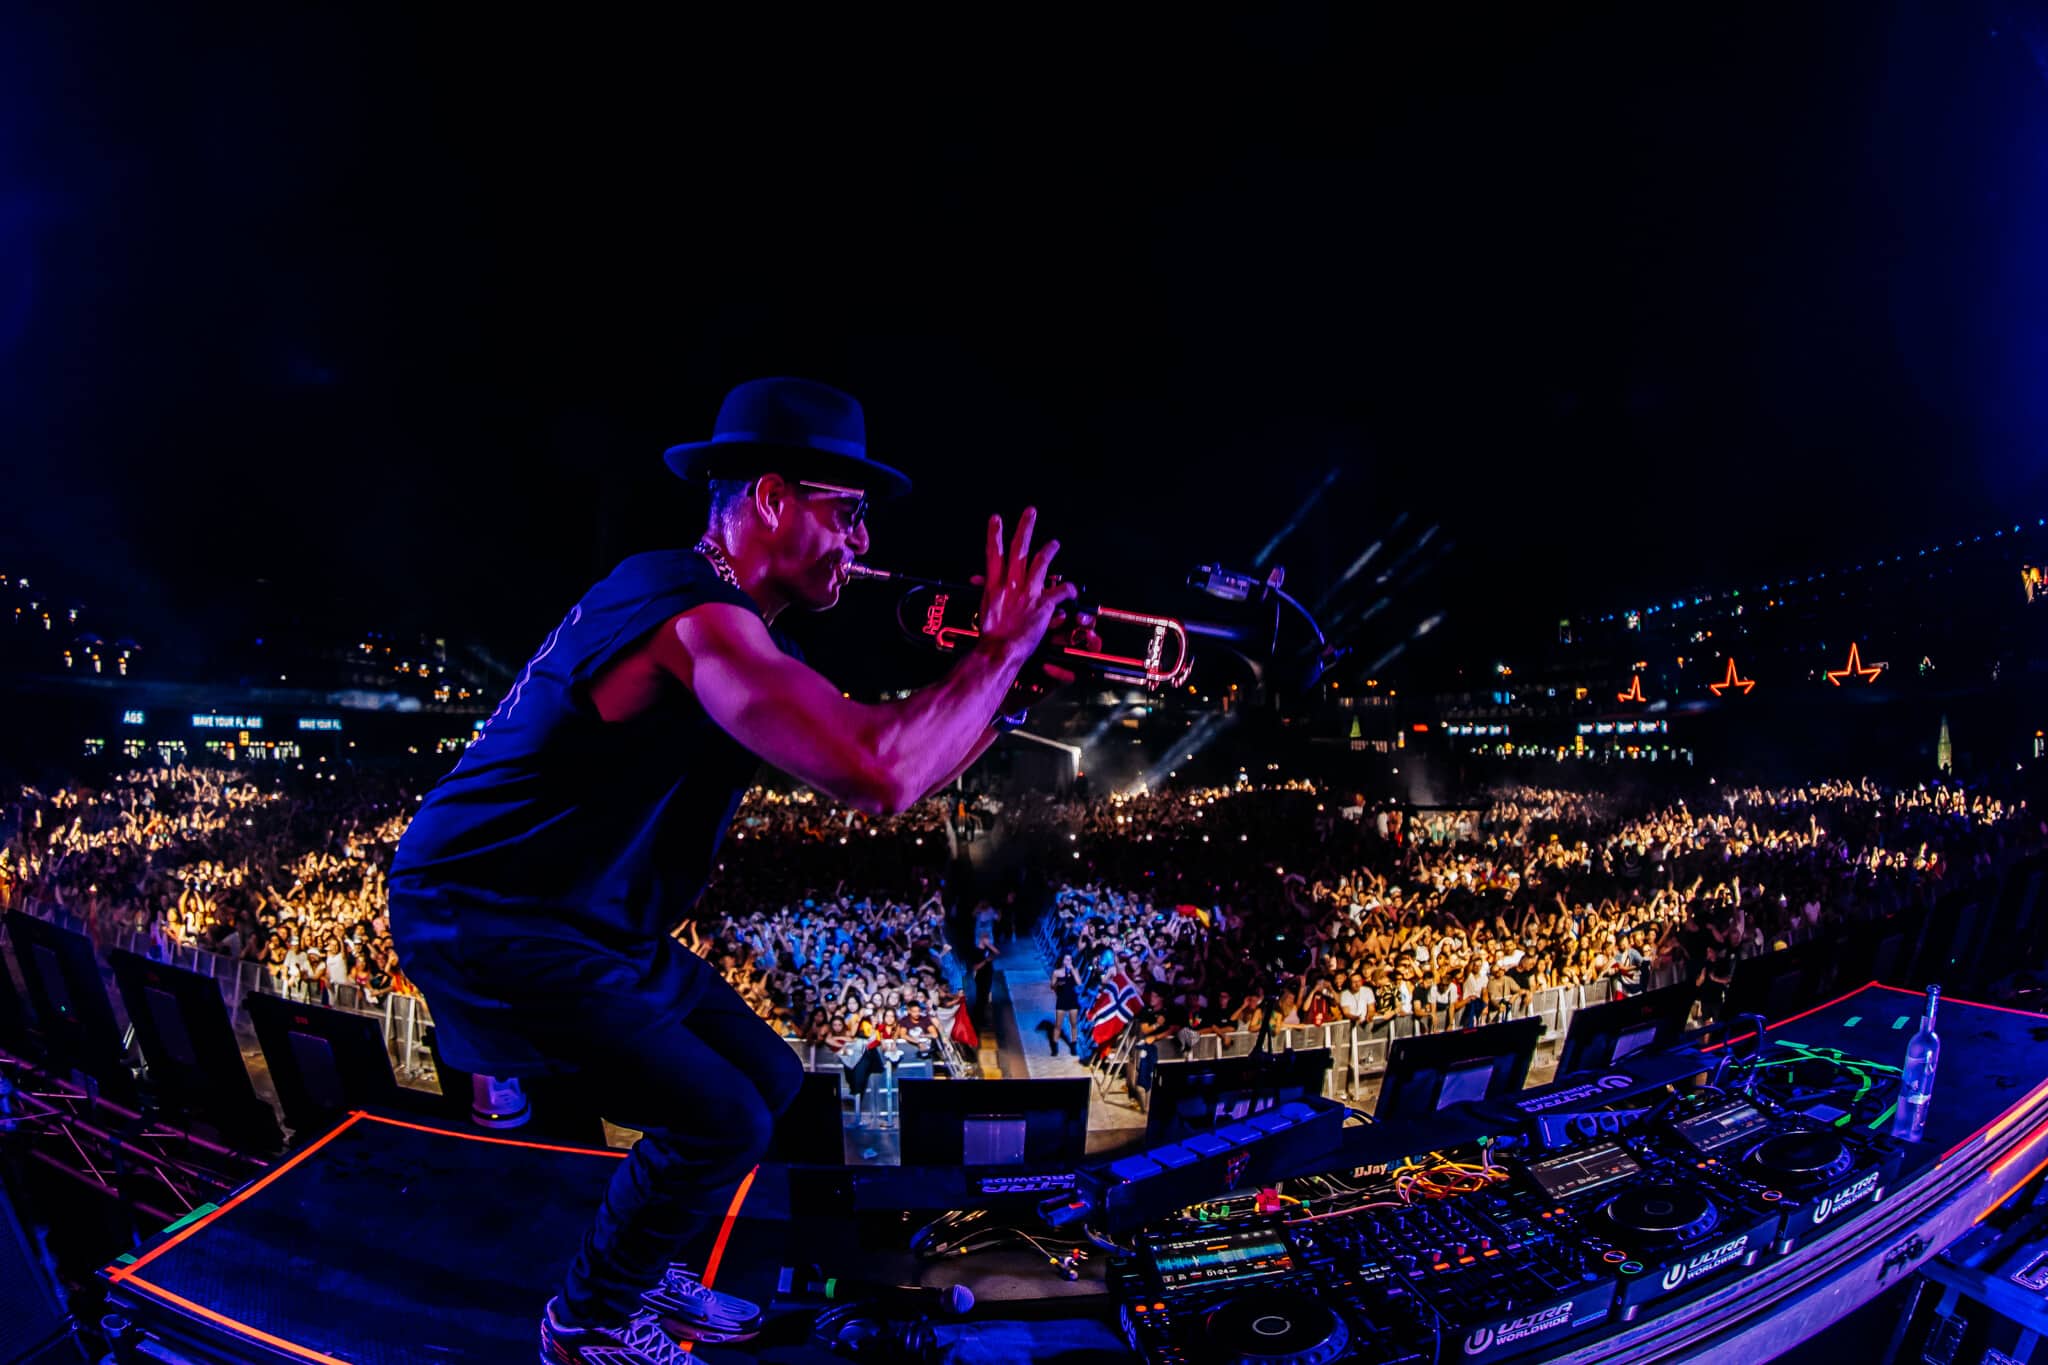 Timmy Trumpet at Ultra Europe by Sil Vanderbruggen